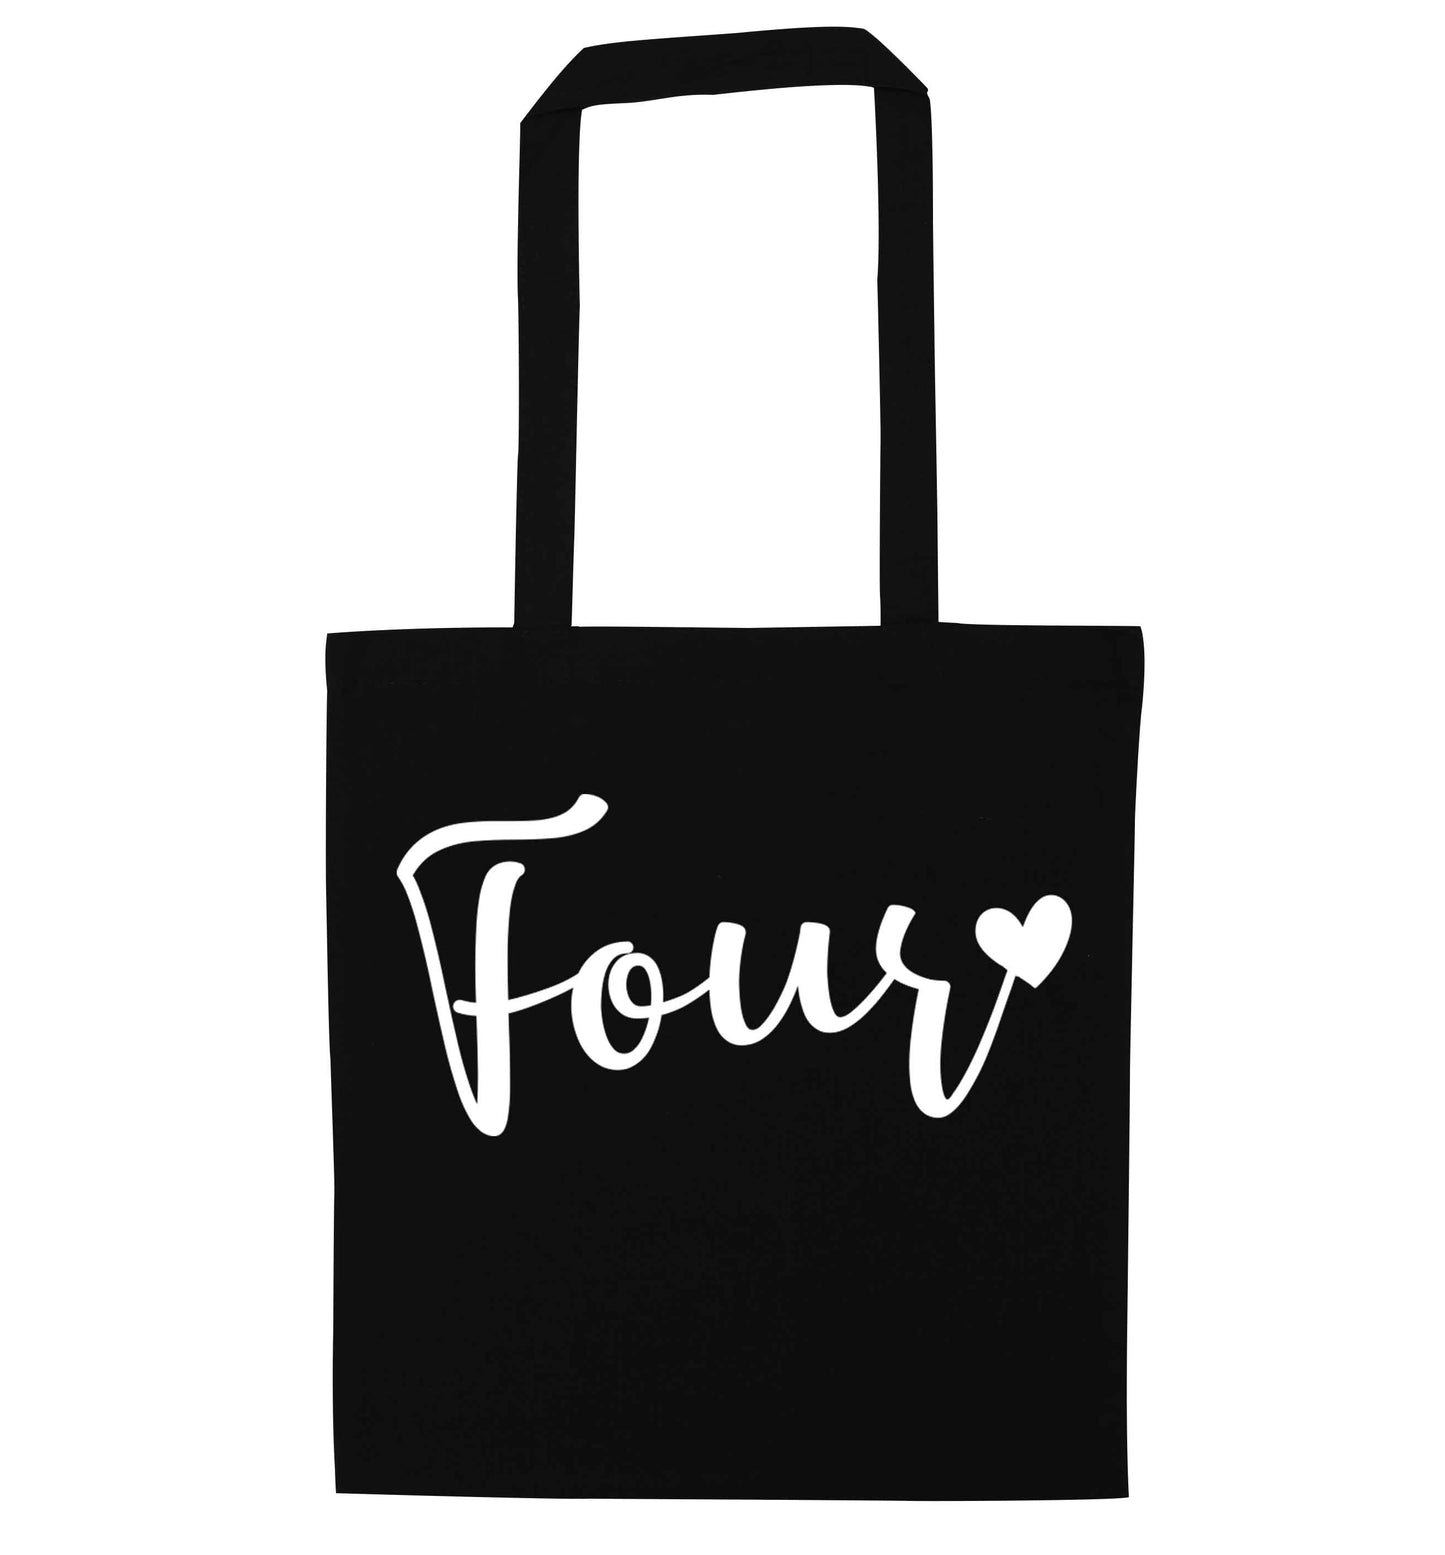 Four and heart black tote bag